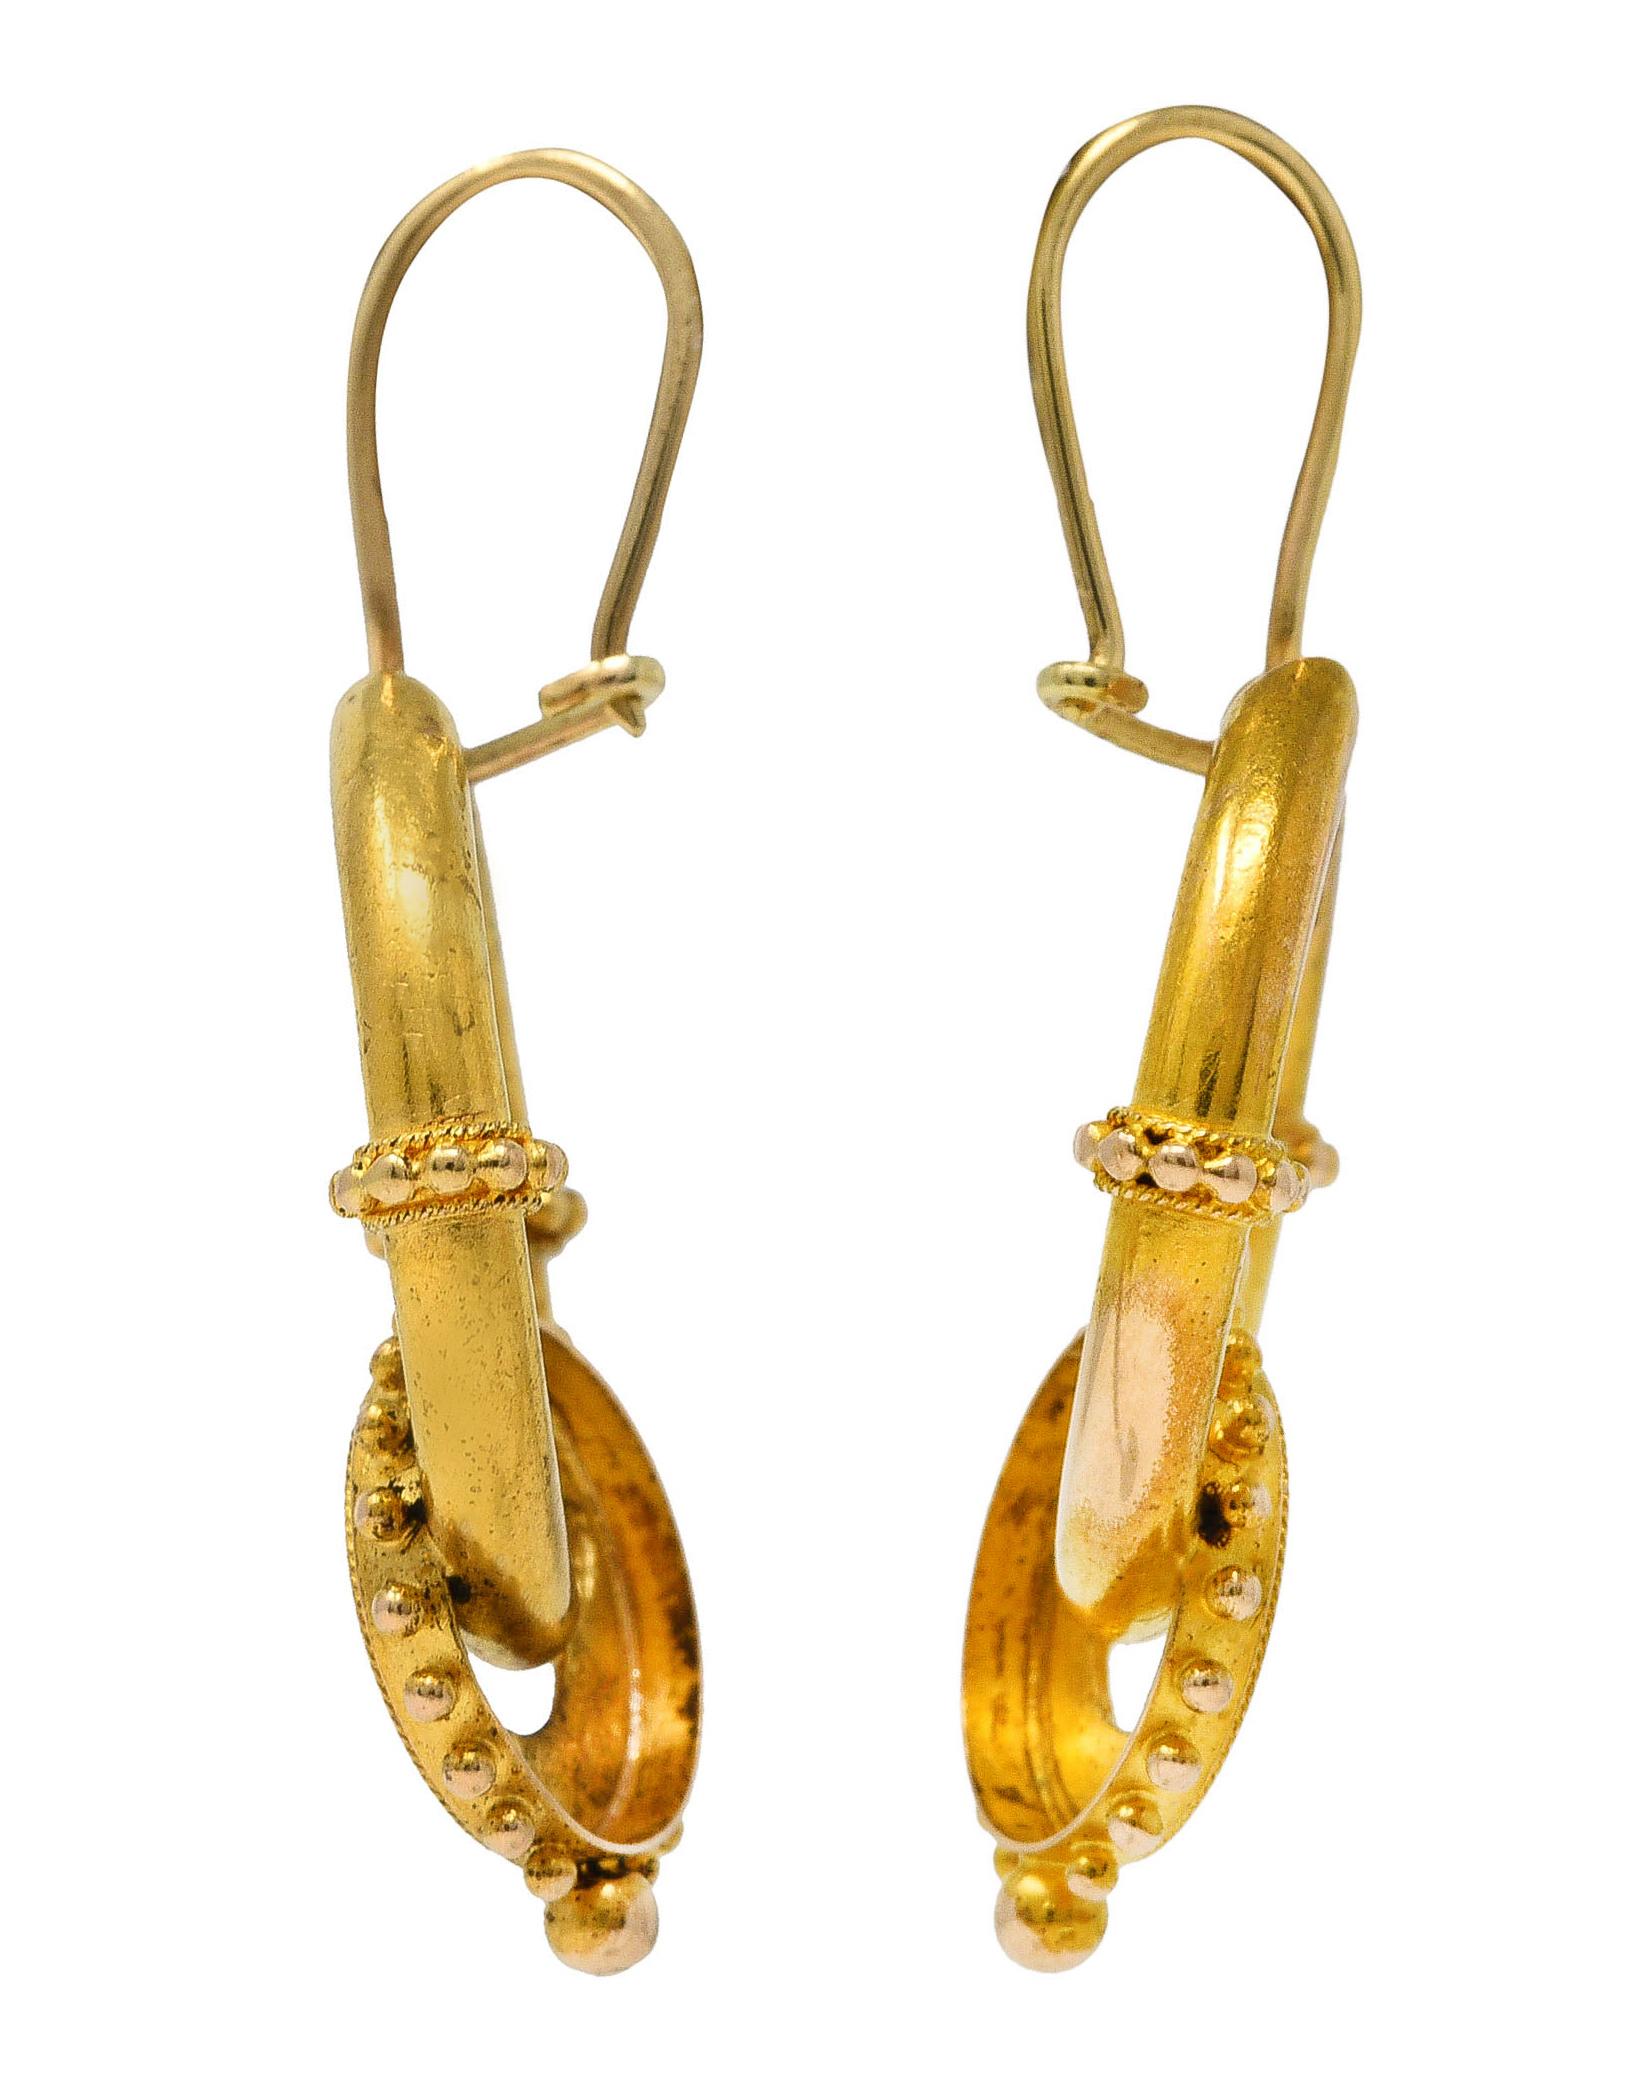 Earrings are designed as round gold hoops with smaller interlocked hoops. With decorative gold beading and twisted rope motif throughout. Completed by wire ear-hooks. Tested as 14 karat gold. Circa: 1870's. Measures: 7/8 x 1 1/2 inches (including